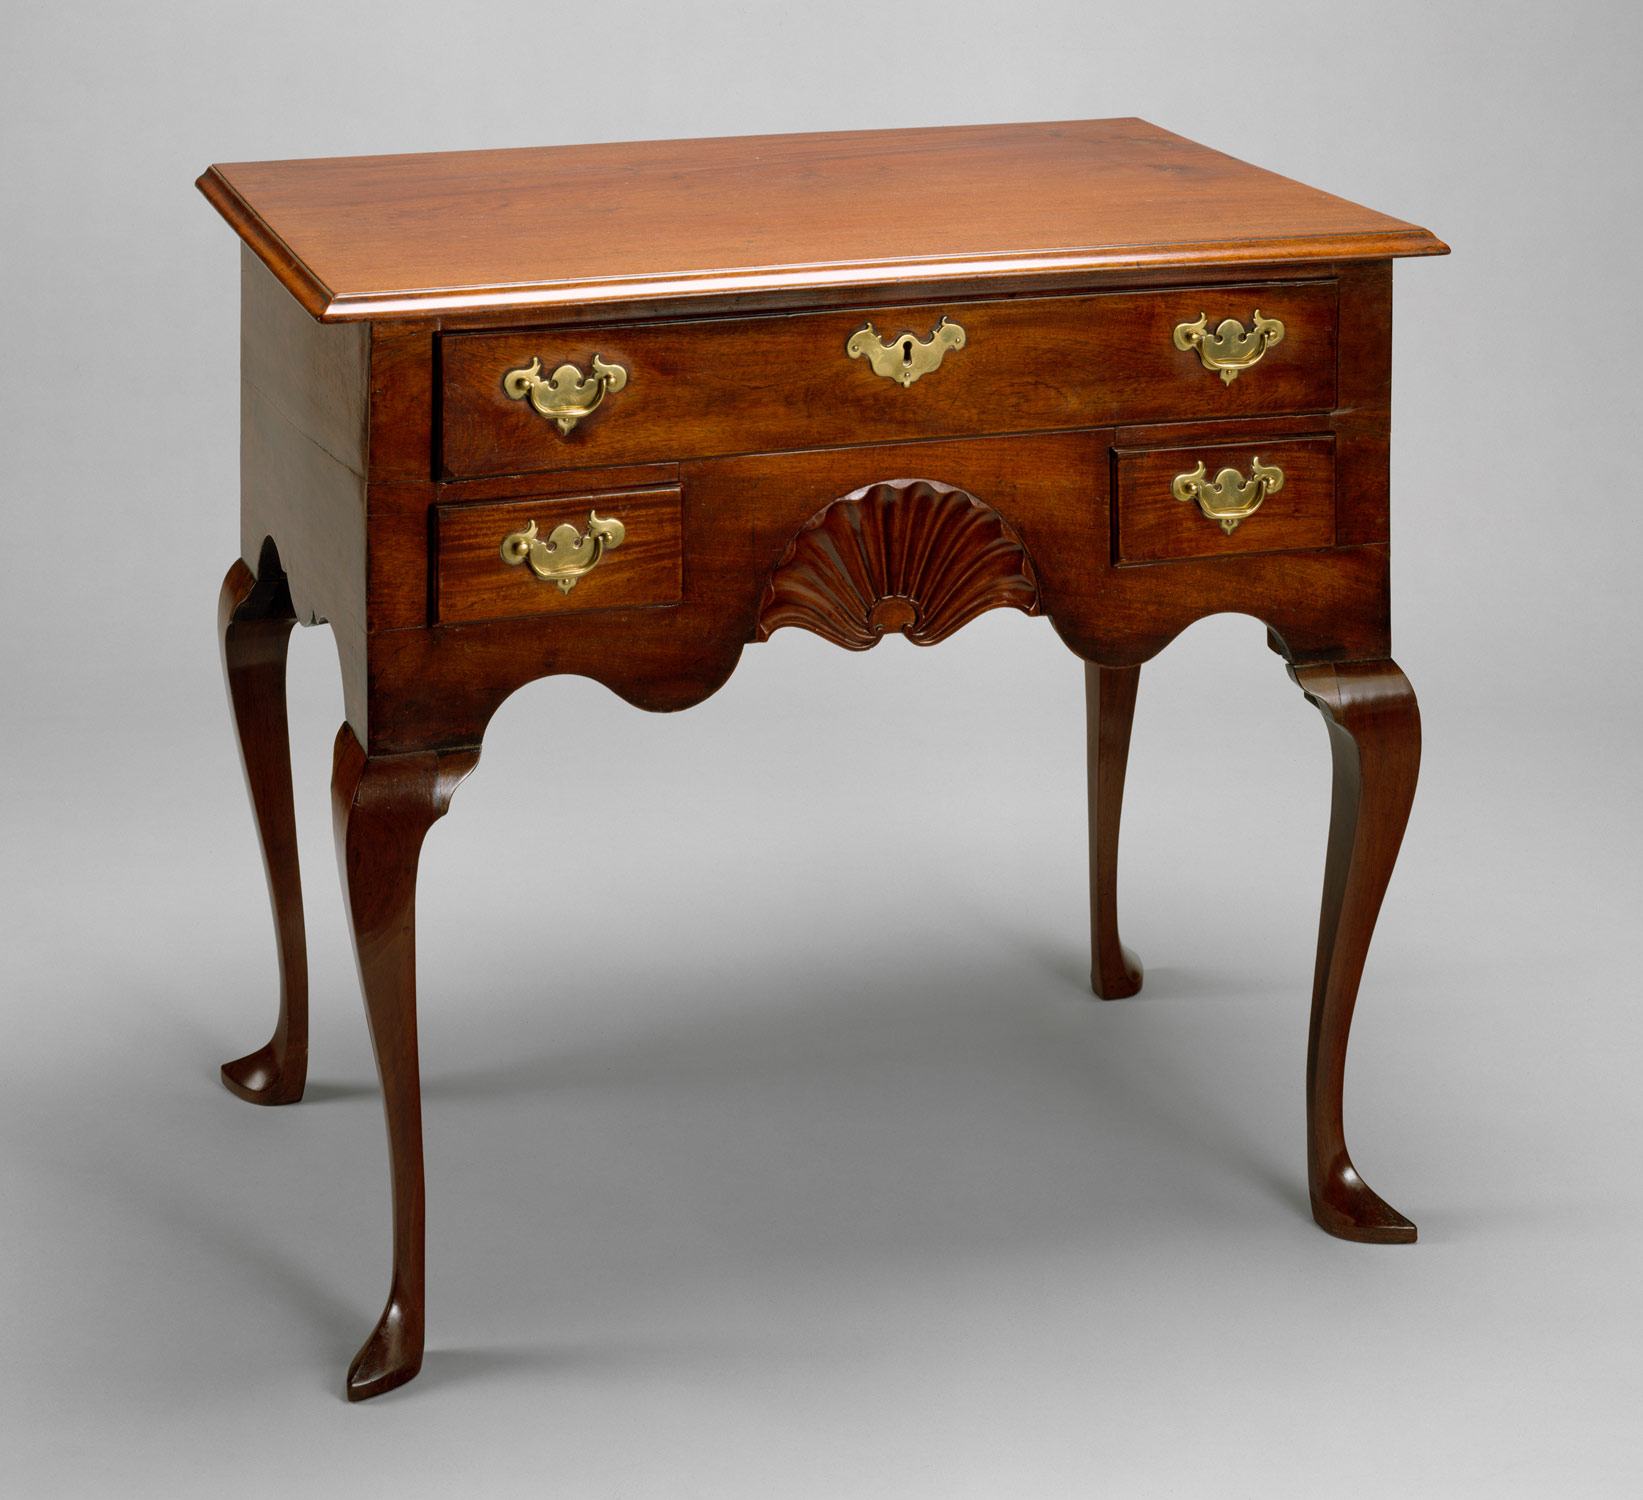 antique furniture BY Projects melbourne architects well design furniture investment